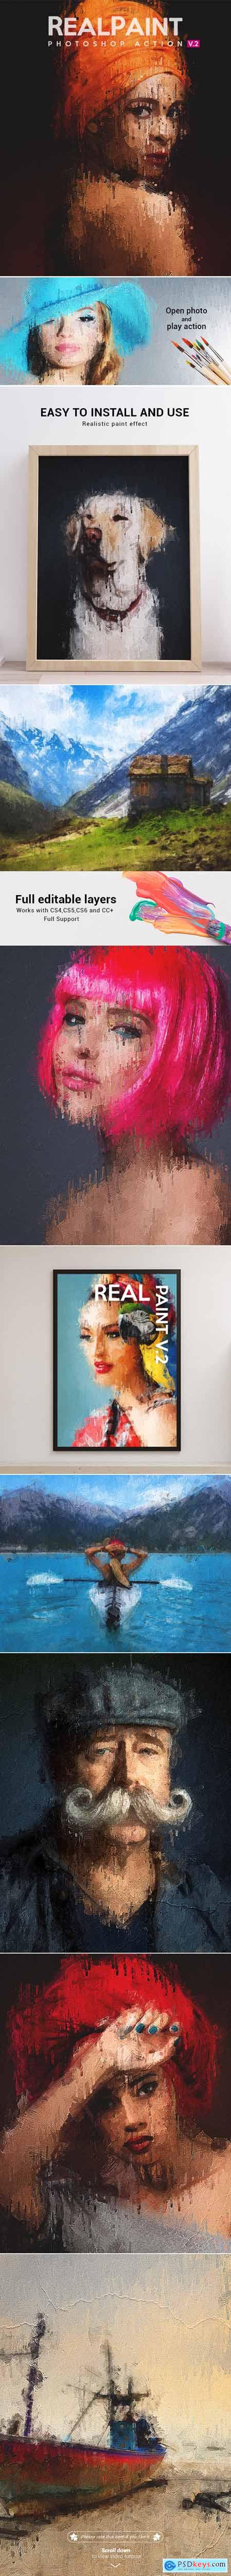 Real Paint V.2 - Photoshop Action 23951125